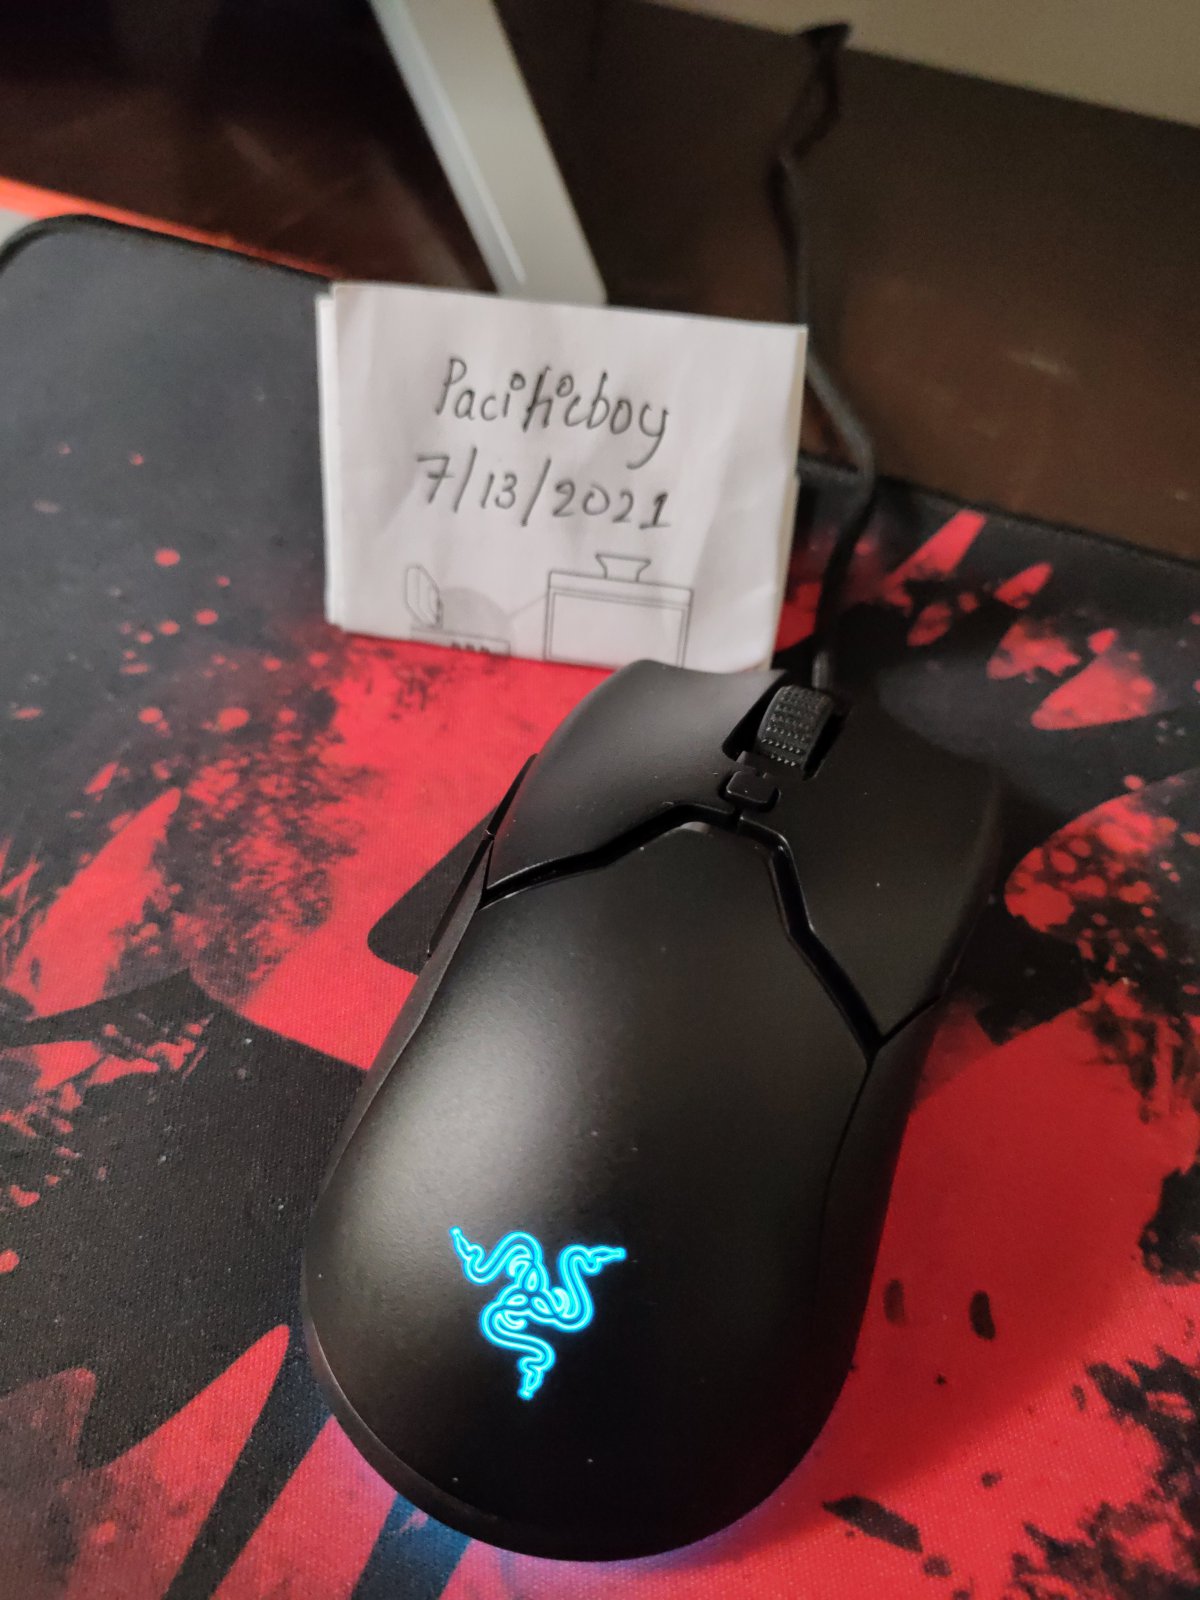 Wireless Gaming Mouses for sale in Vadodara, Gujarat, India, Facebook  Marketplace